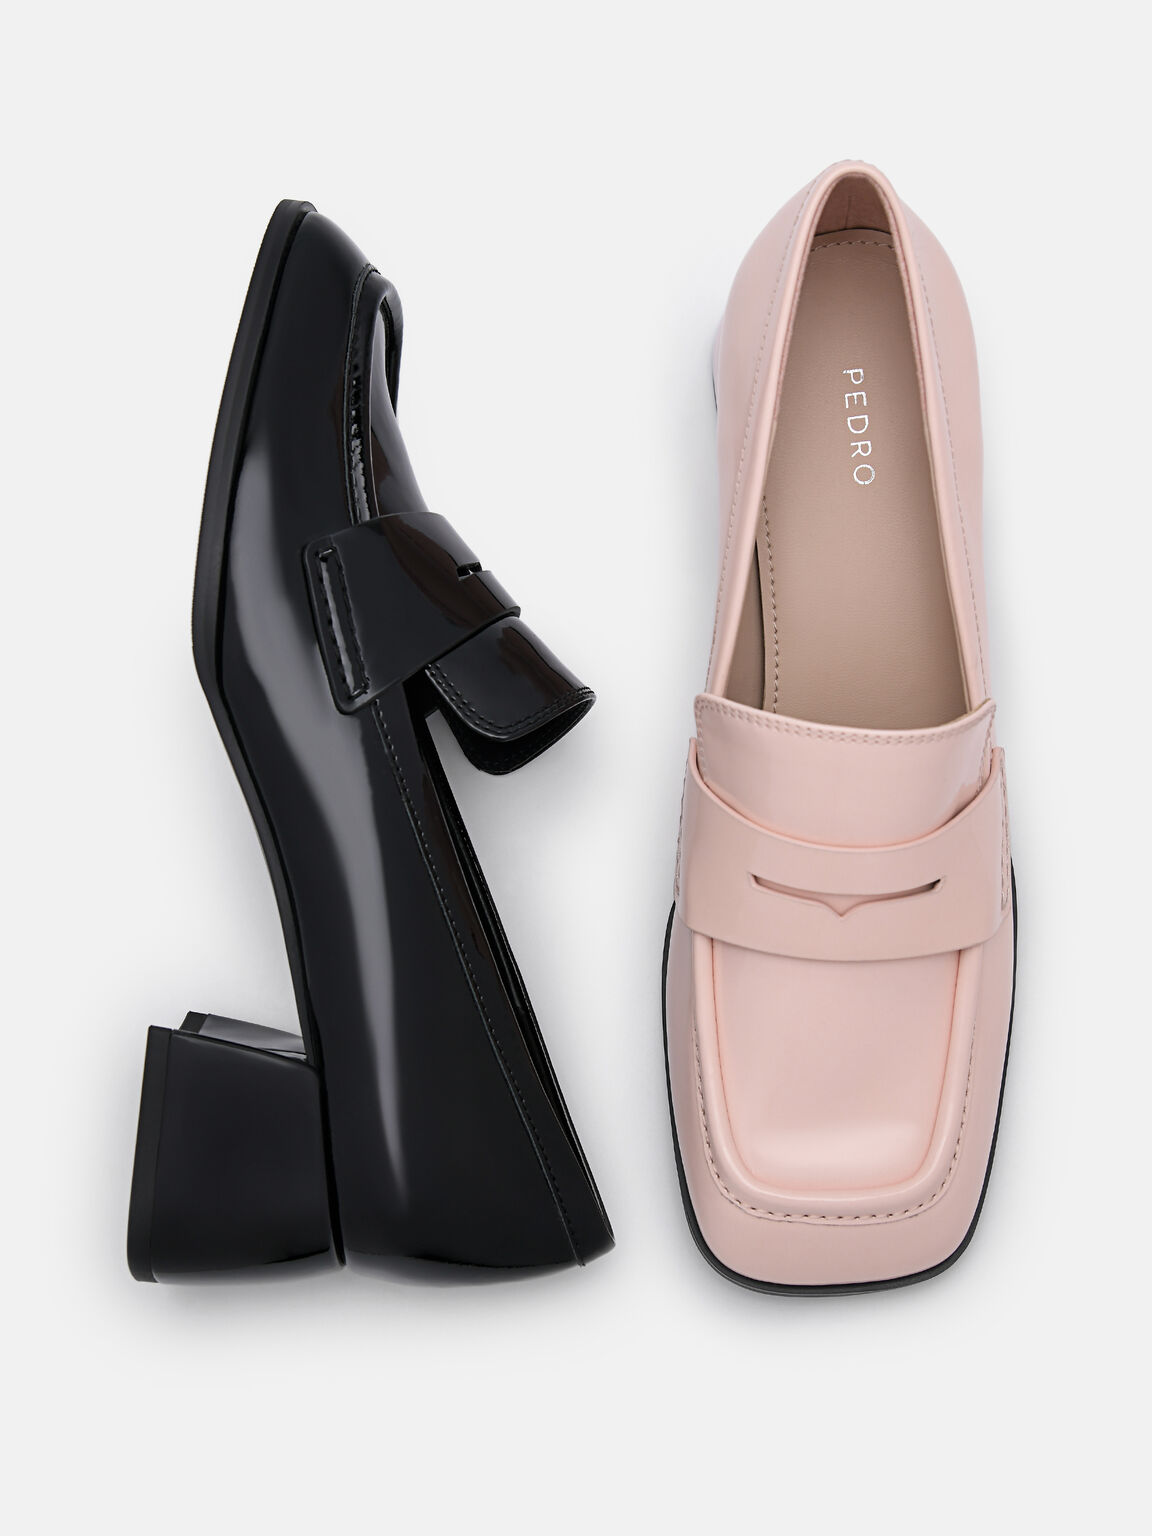 Maggie Leather Heel Loafers, Blush, hi-res